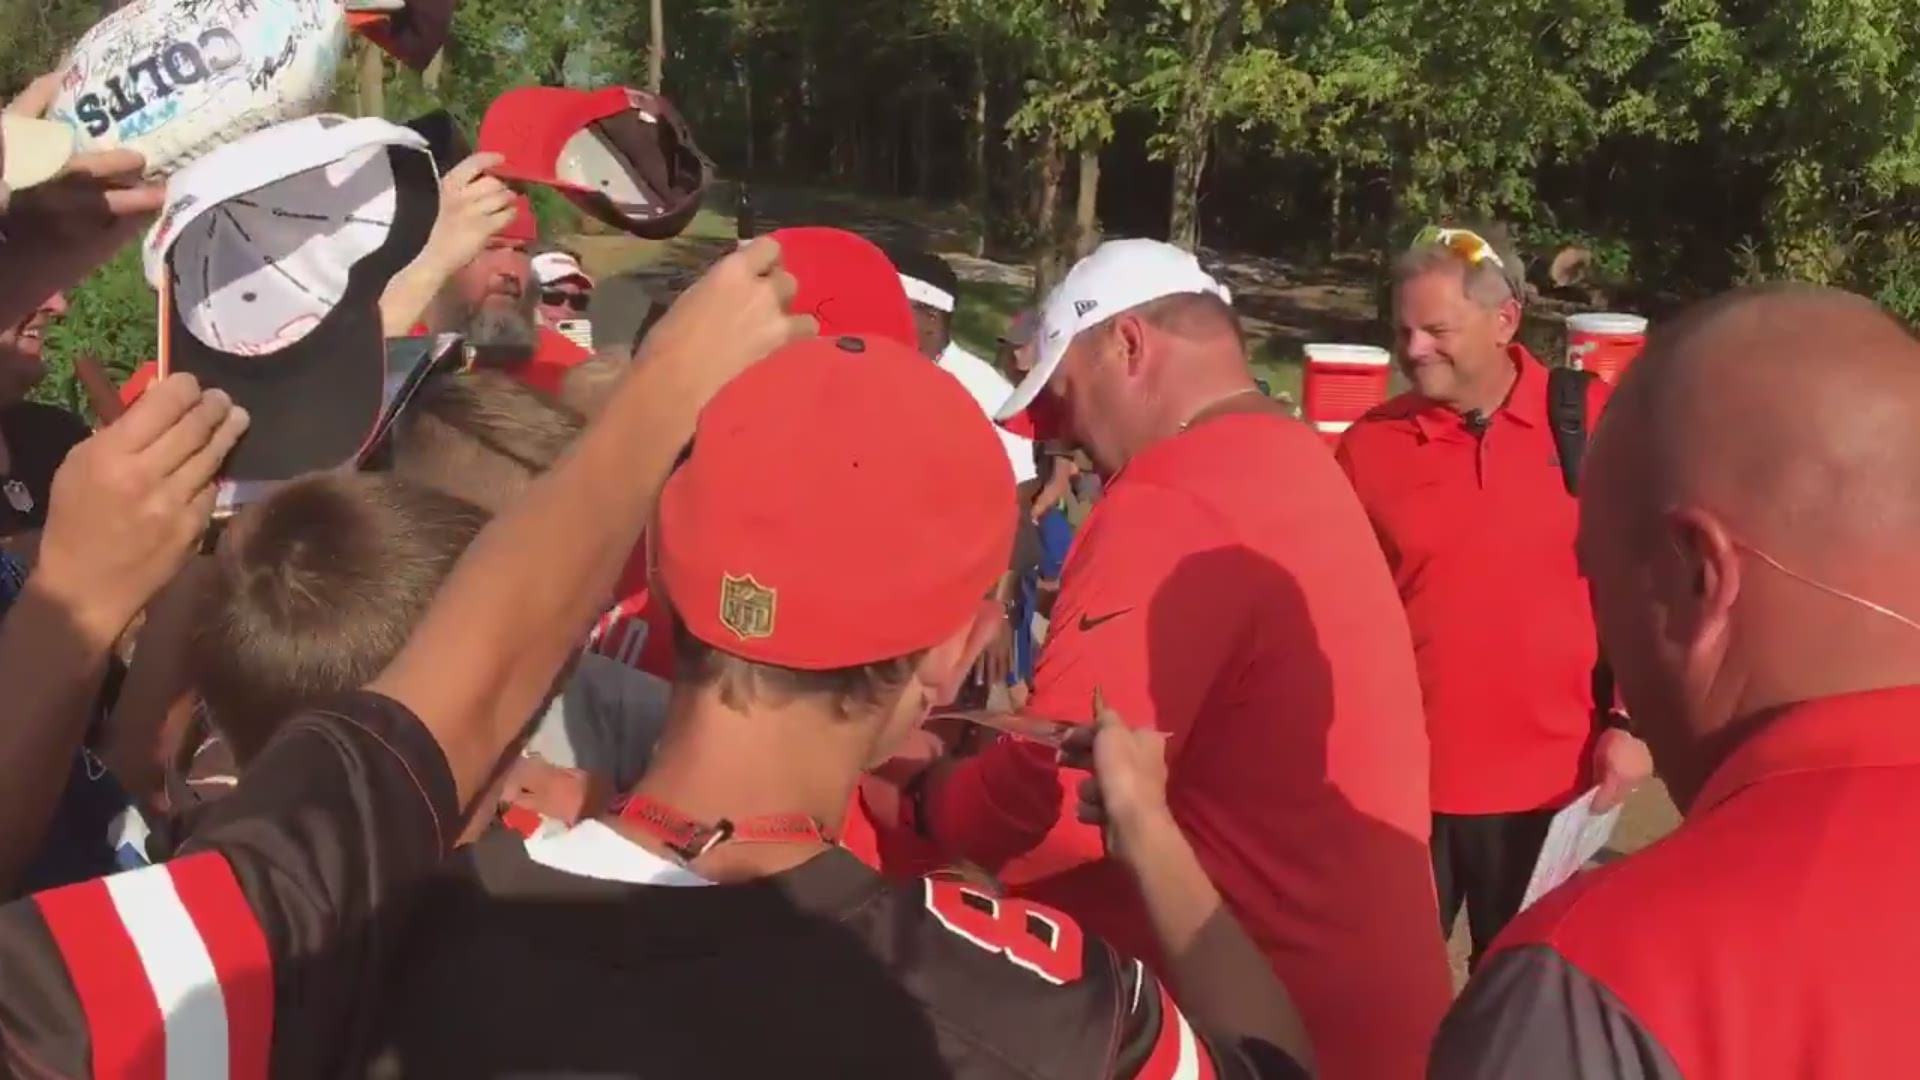 Cleveland Browns coach Freddie Kitchens signed autographs for fans following the joint practice with the Indianapolis Colts on August 14, 2019.